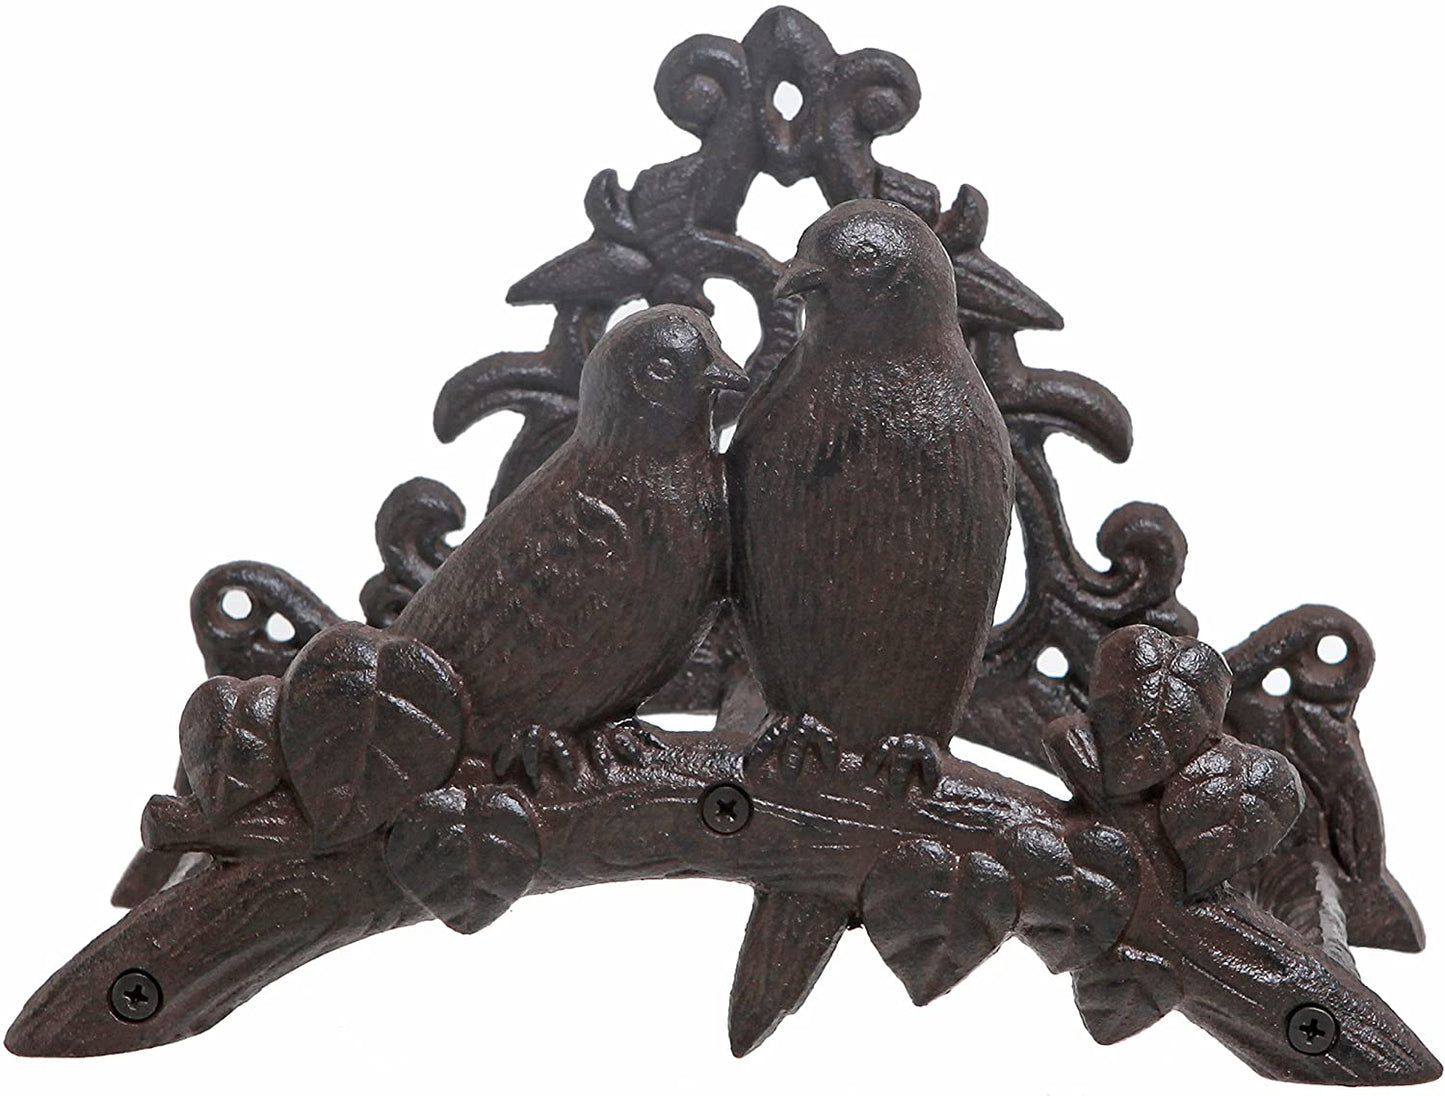 Wall Mounted Cast Iron Garden Hose Hanger Rack with Bird Ornament and Tree Branch Design